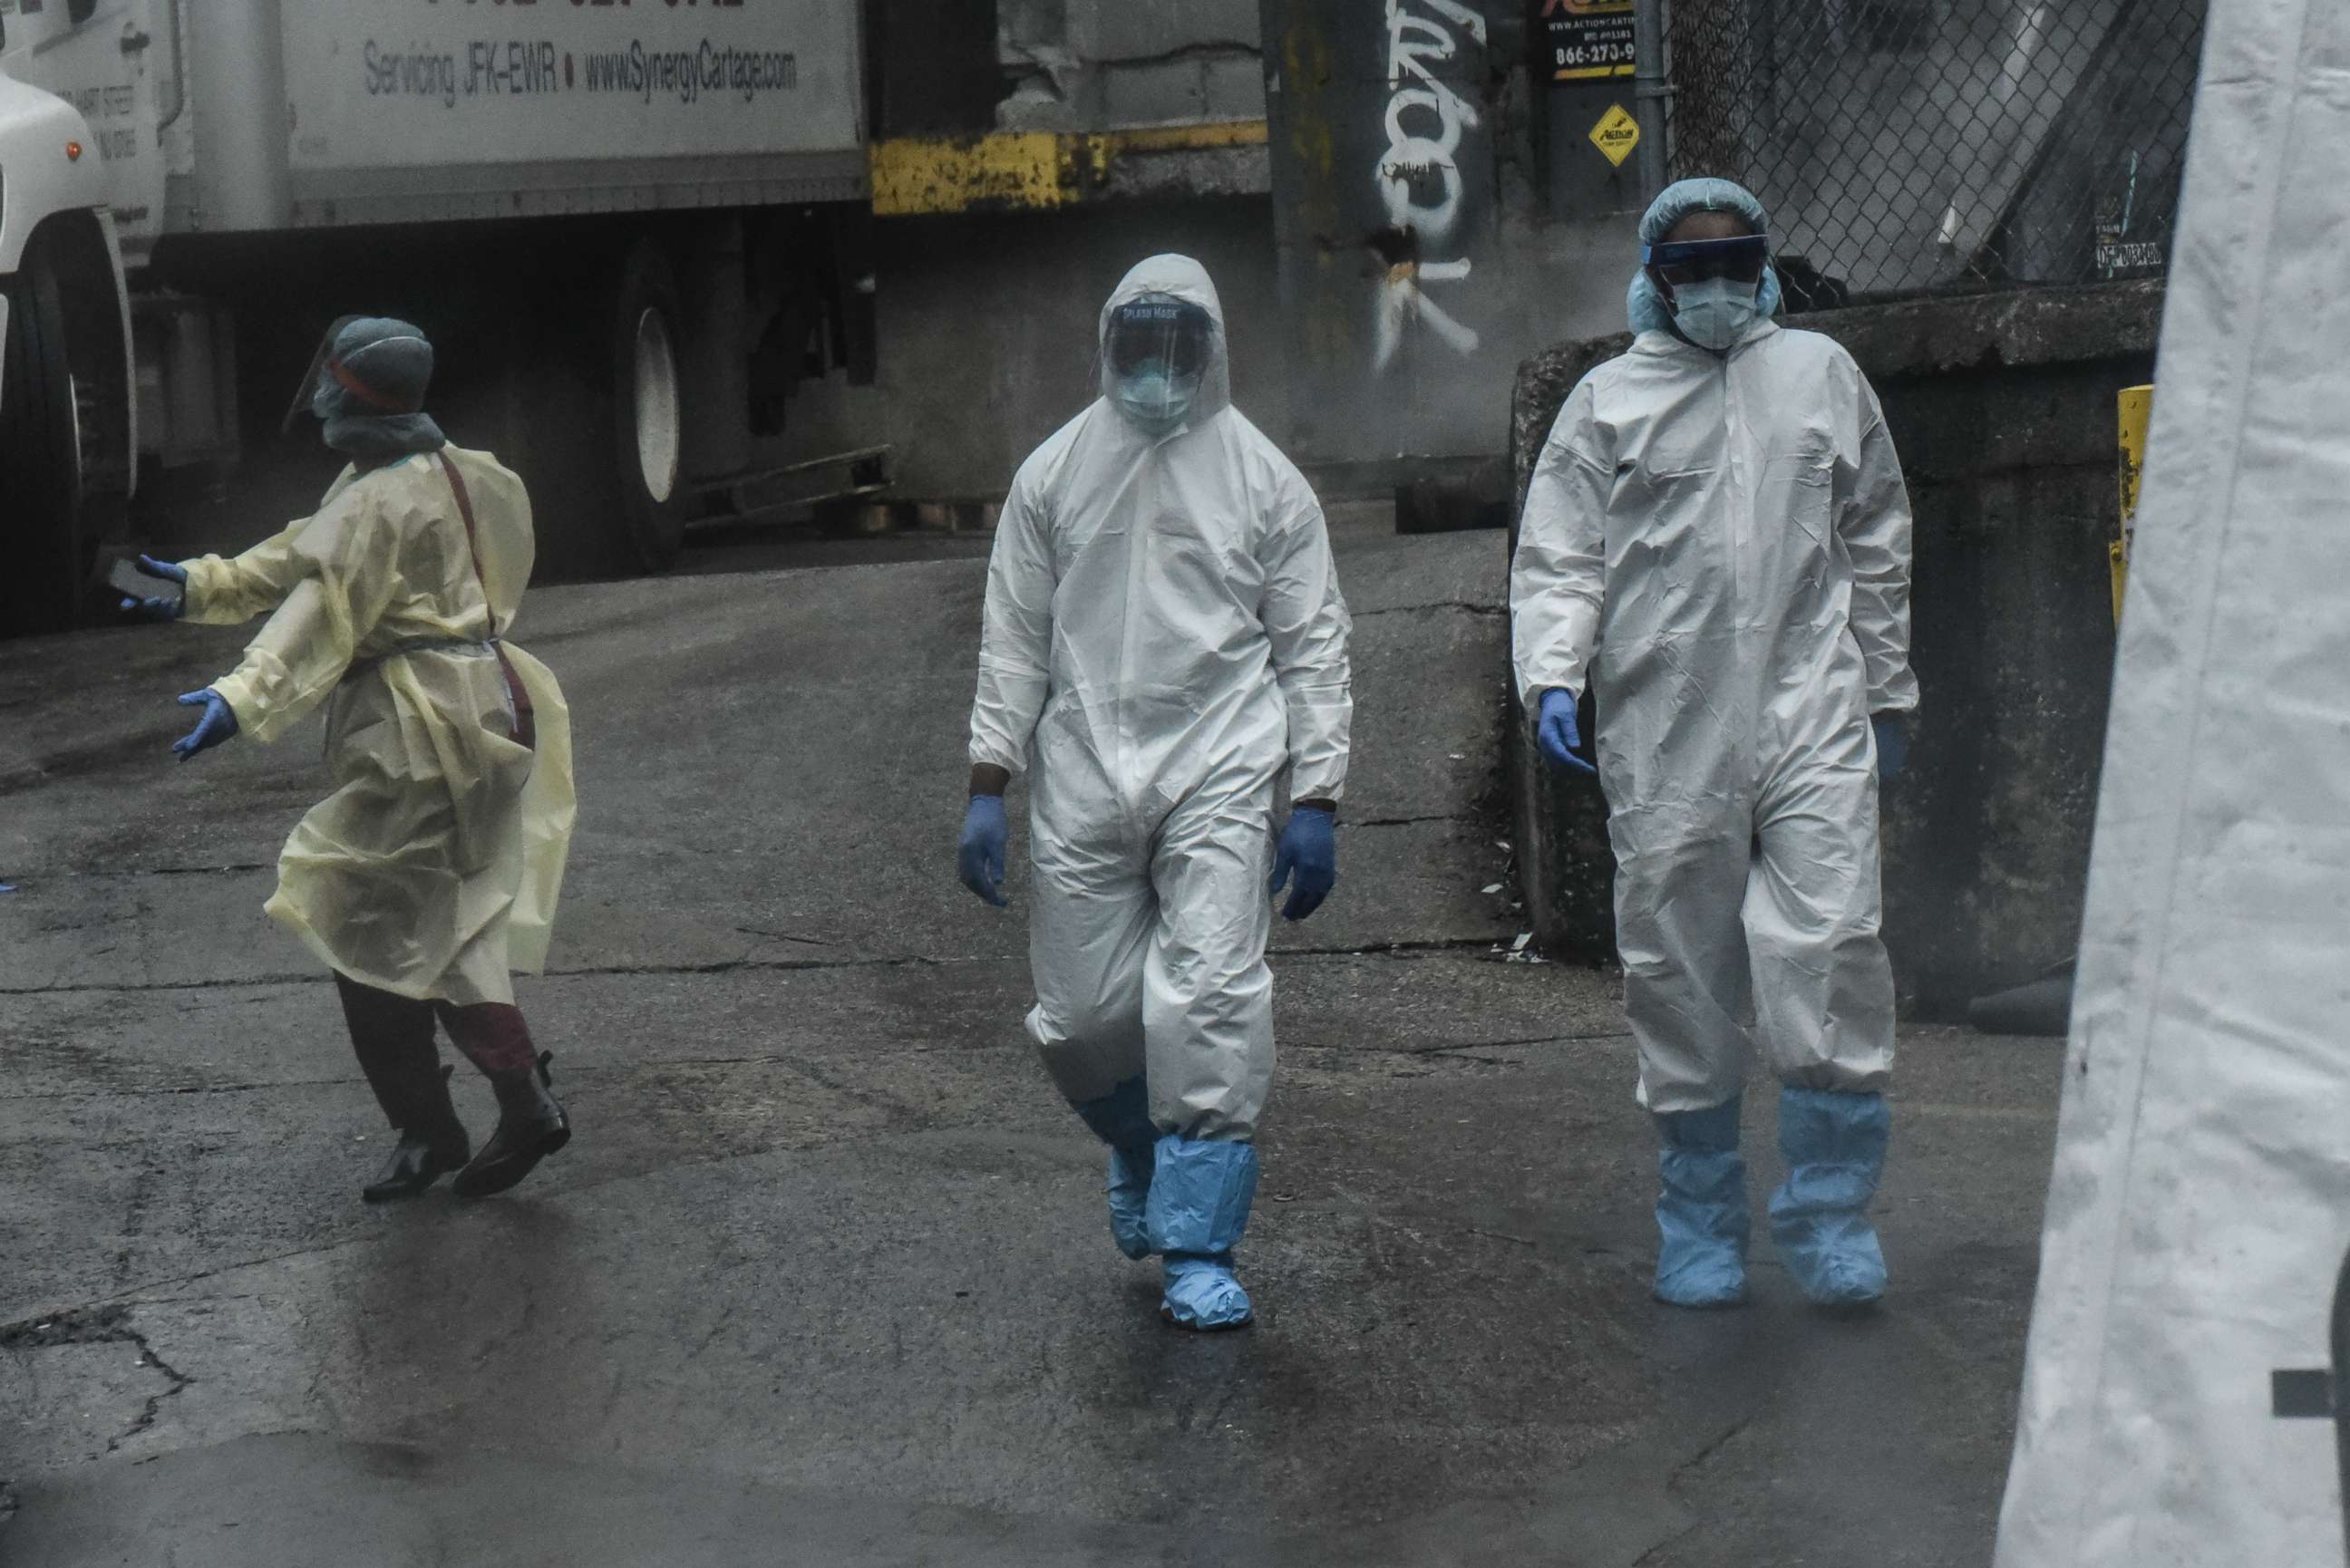 PHOTO: Medical workers approach a refrigerator truck being used as a morgue outside of Brooklyn Hospital Center amid the coronavirus pandemic on April 3, 2020, in New York.